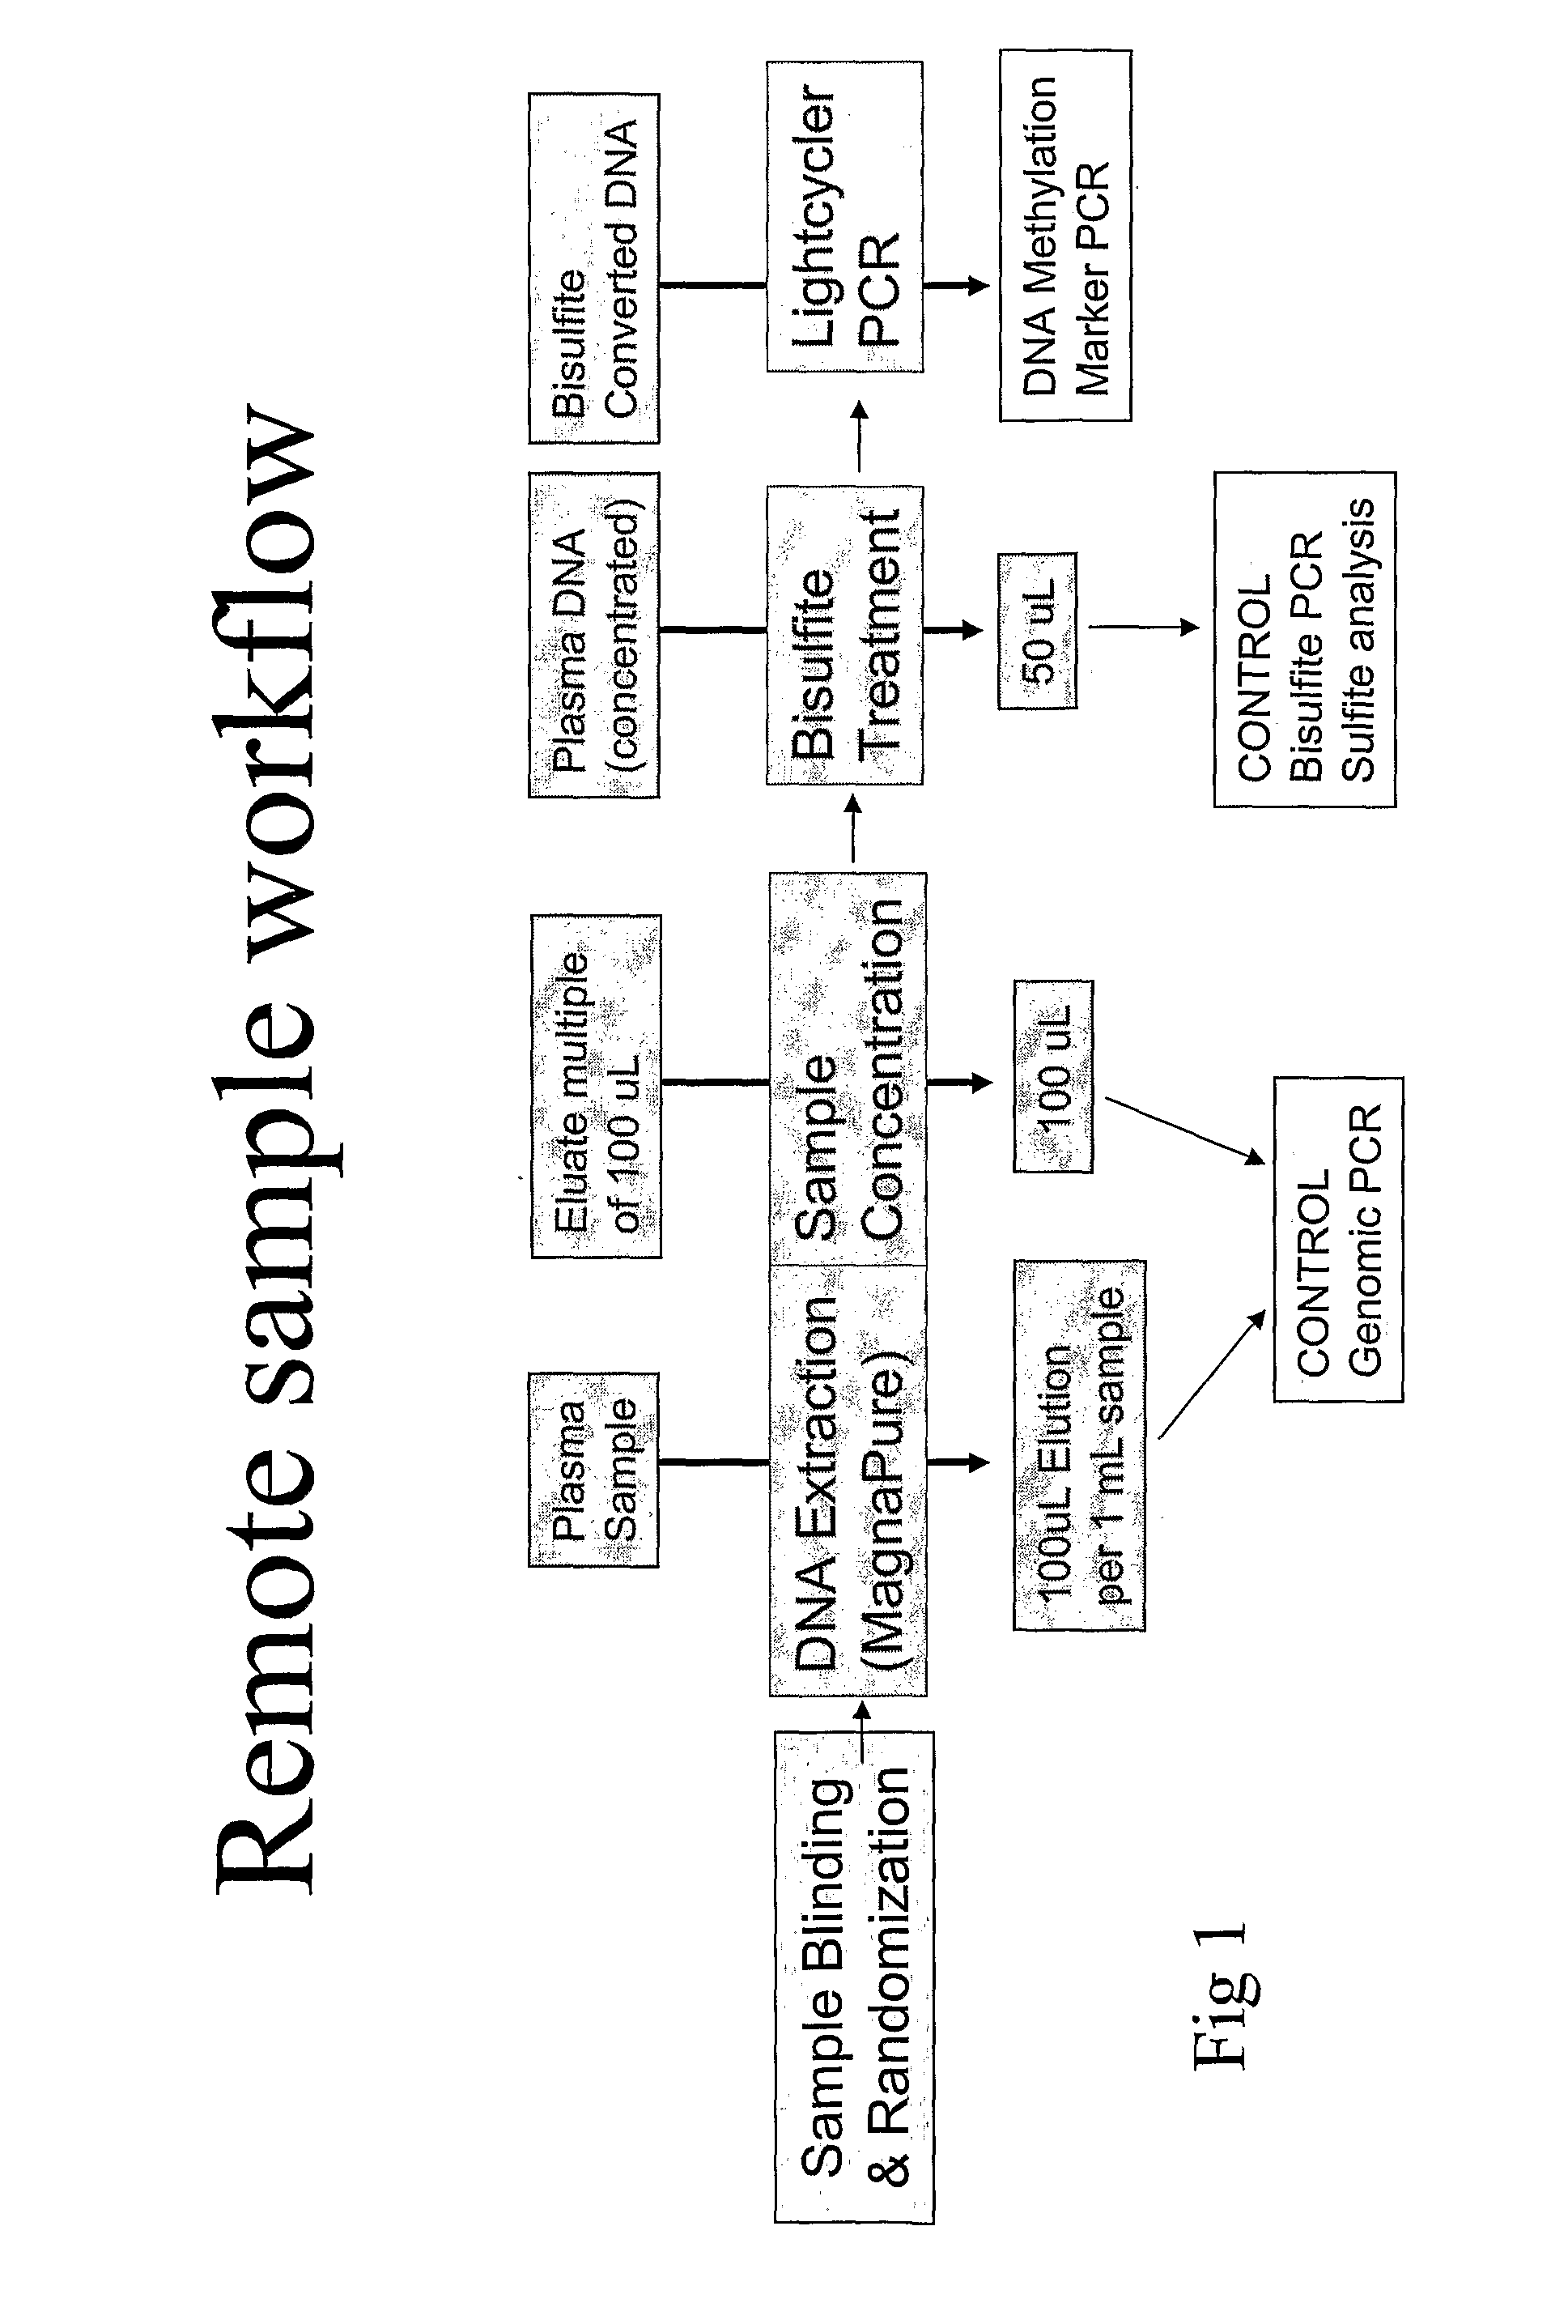 Method for providing DNA fragments derived from a remote sample